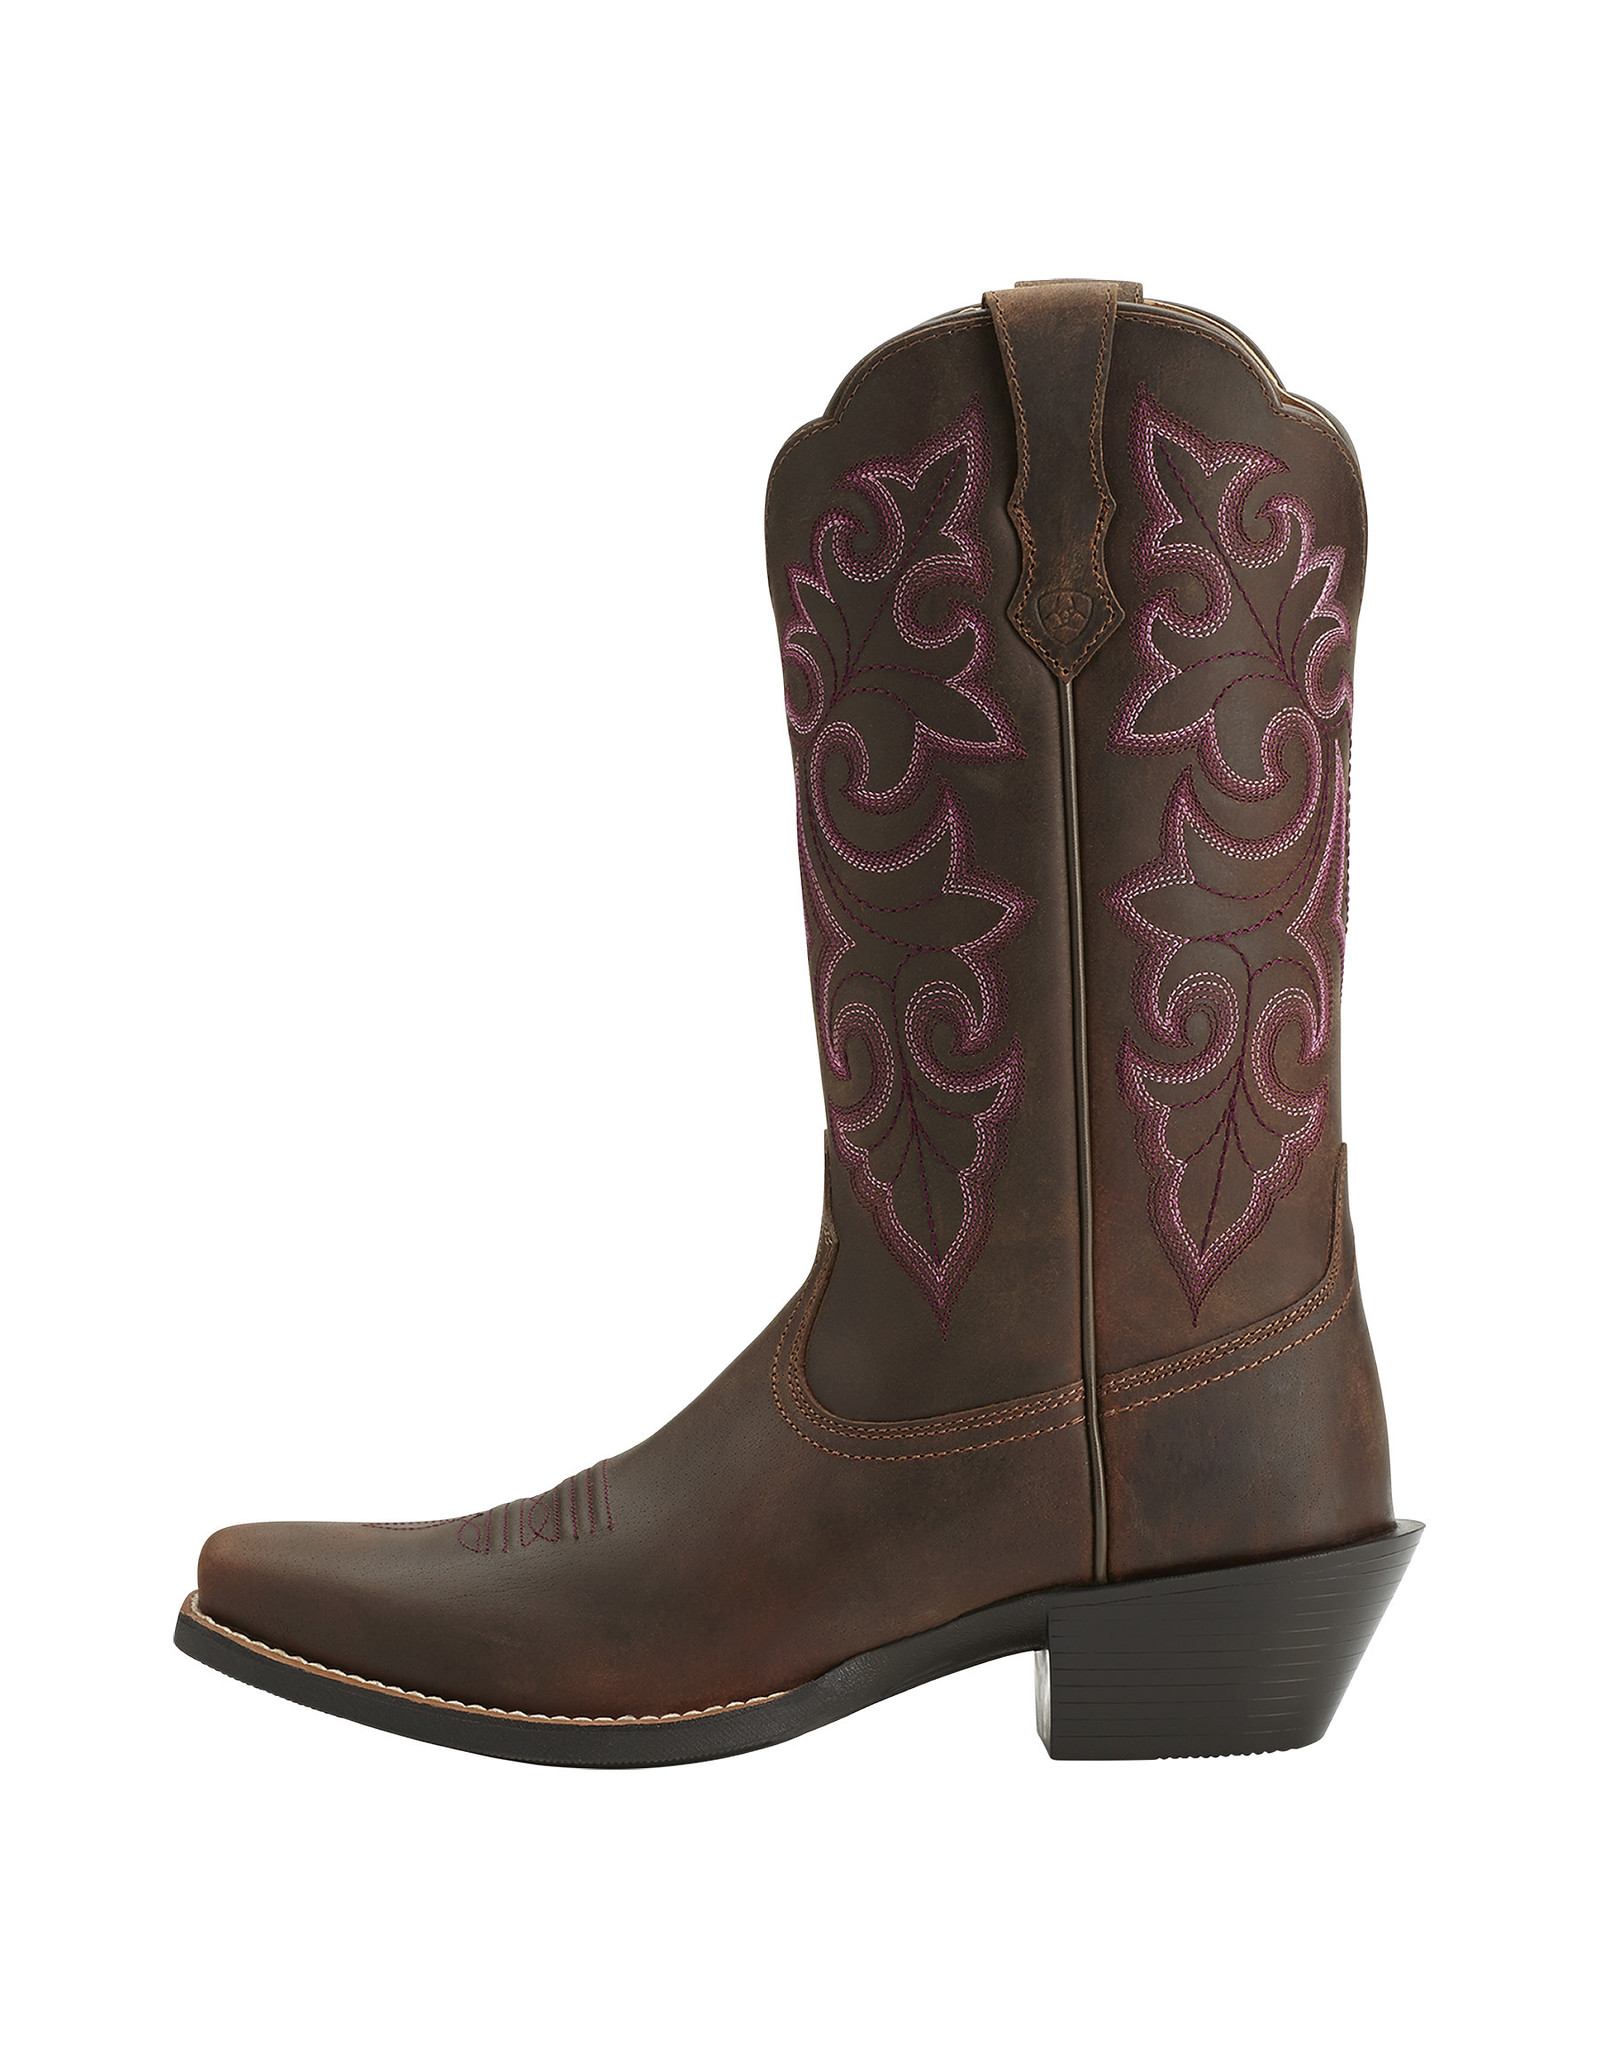 Ariat Ladies Roundup Small Square 10014172 Western Boots